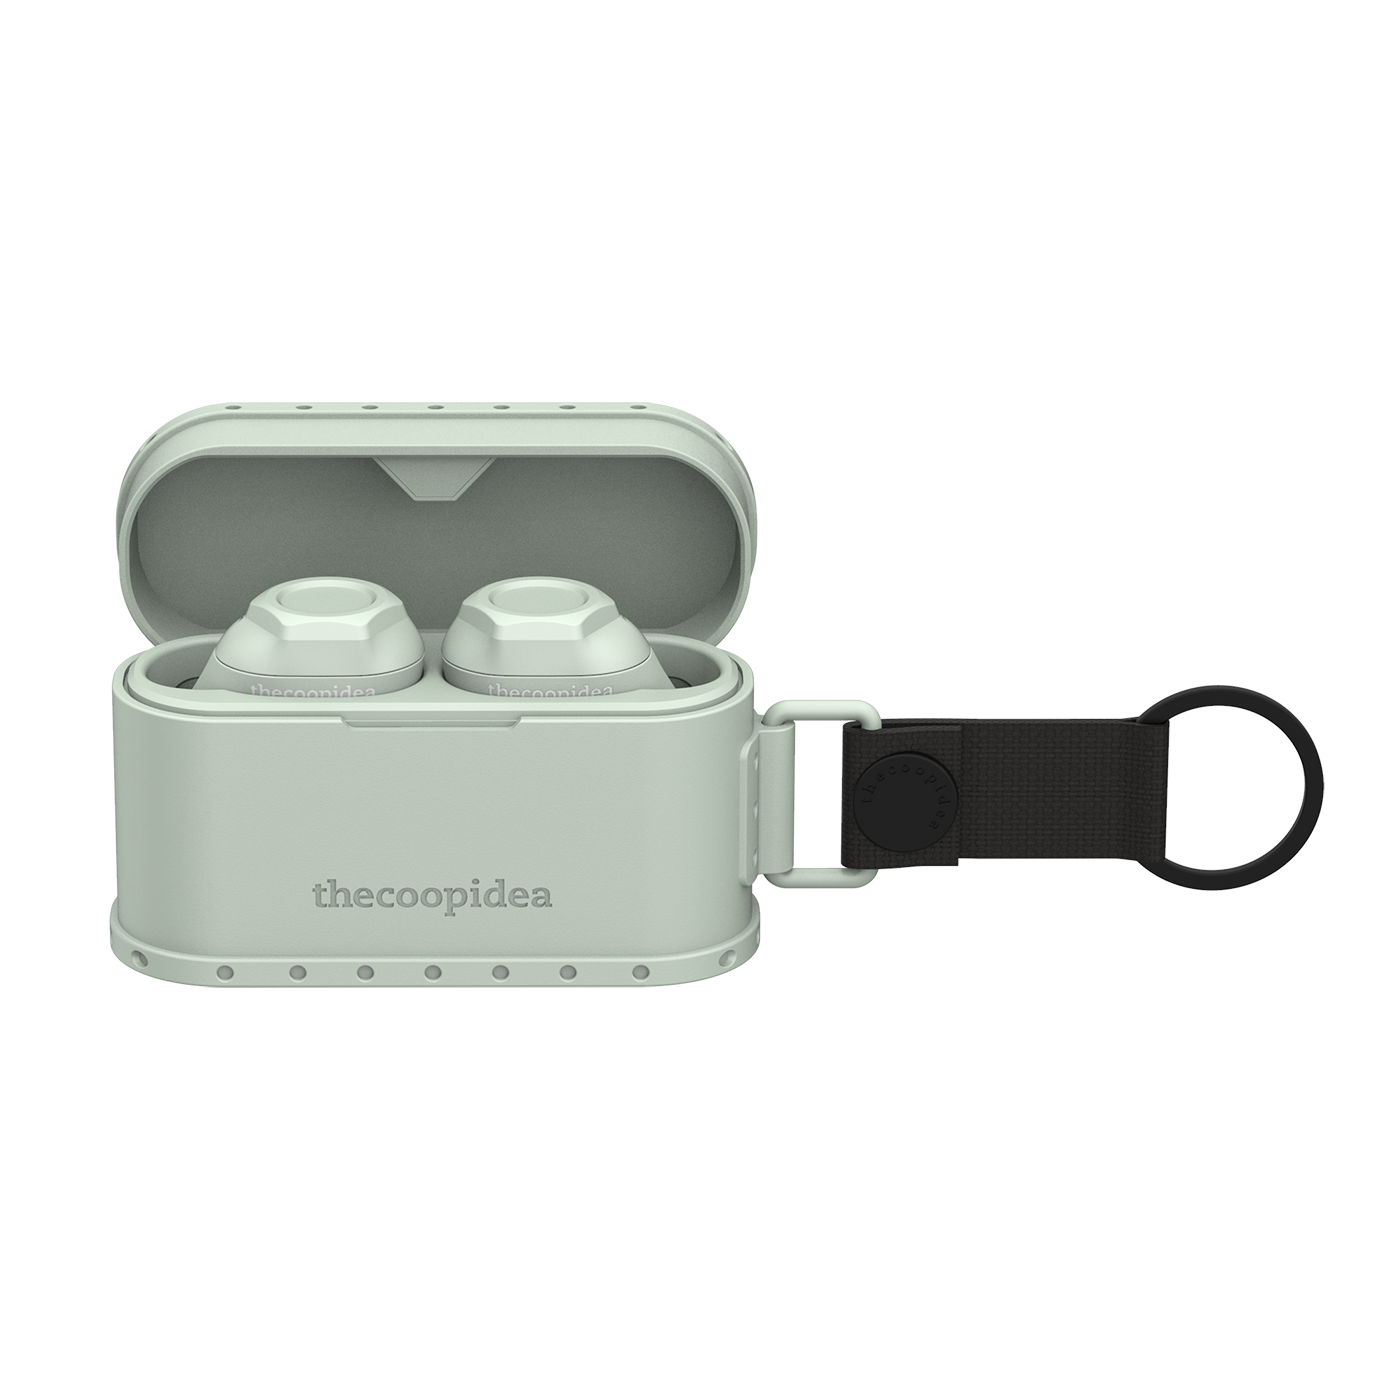 thecoopidea - CARGO 02 True Wireless Earbuds- Olive